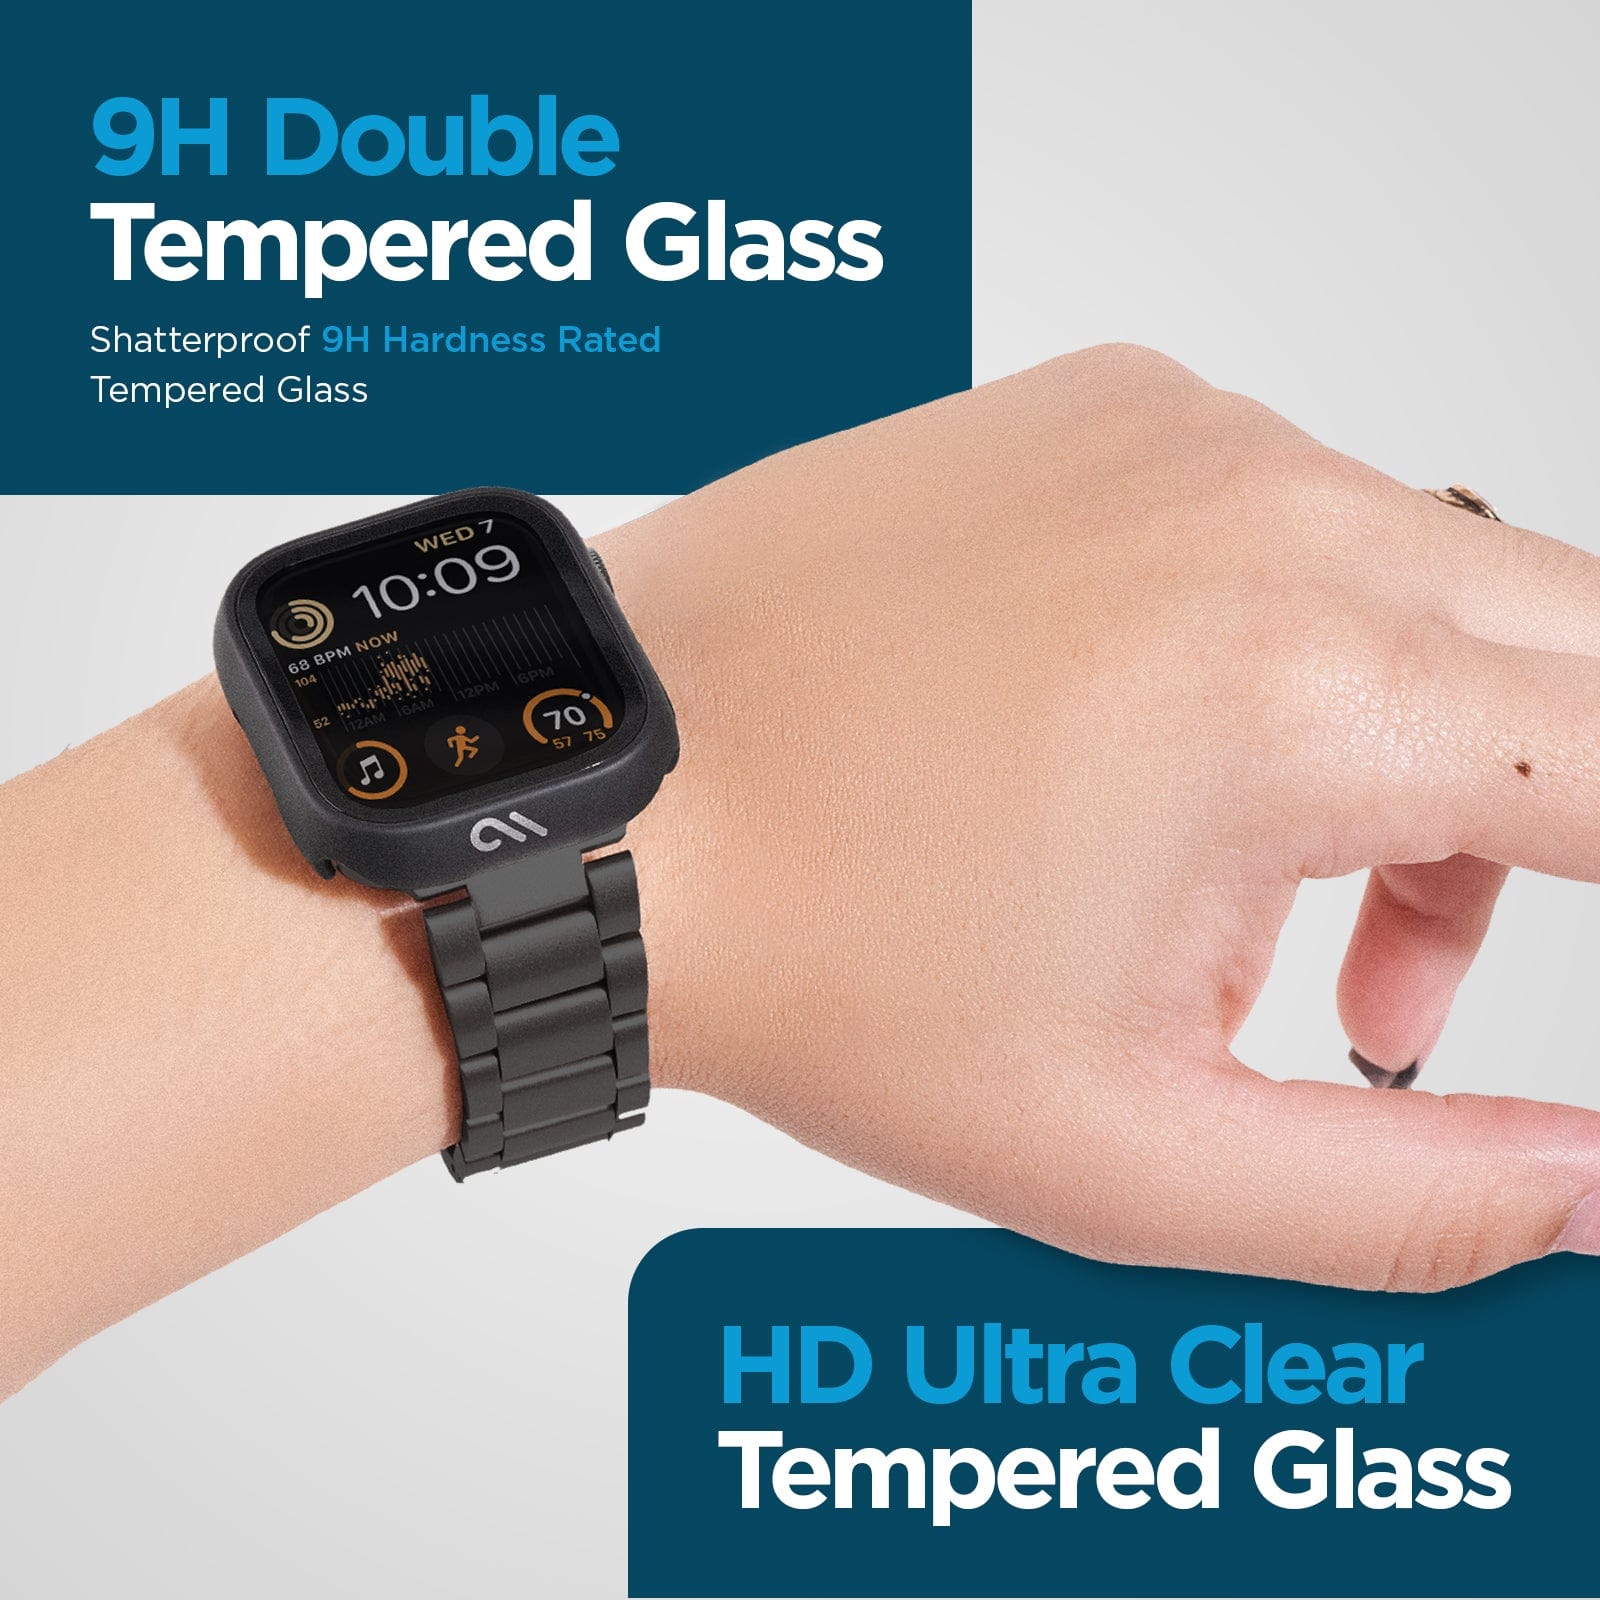 9H DOUBLE TEMPERED GLASS SHATTERPROOF 9H HARDNESS RATED TEMPERED GLASS. HD ULTRA CLEAR TEMPERED GLASS.